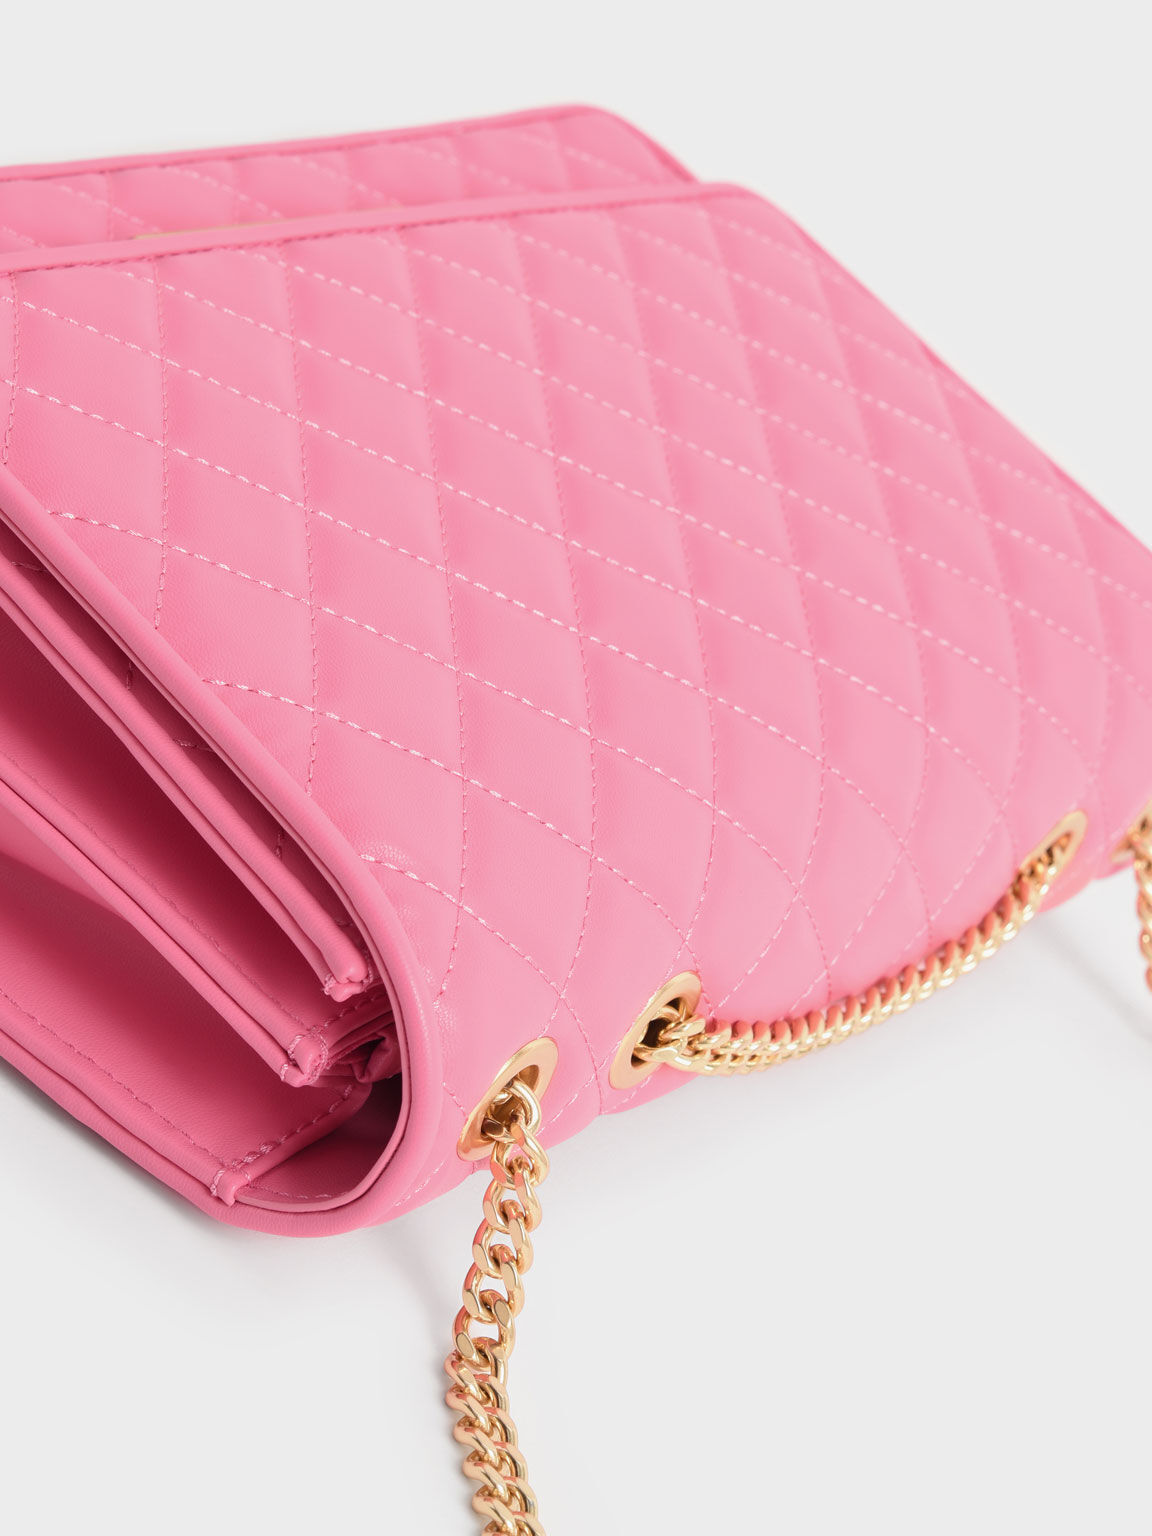 Charles Keith Quilted Pink Leather Handbag-Practical for both Daily  Outing+Party